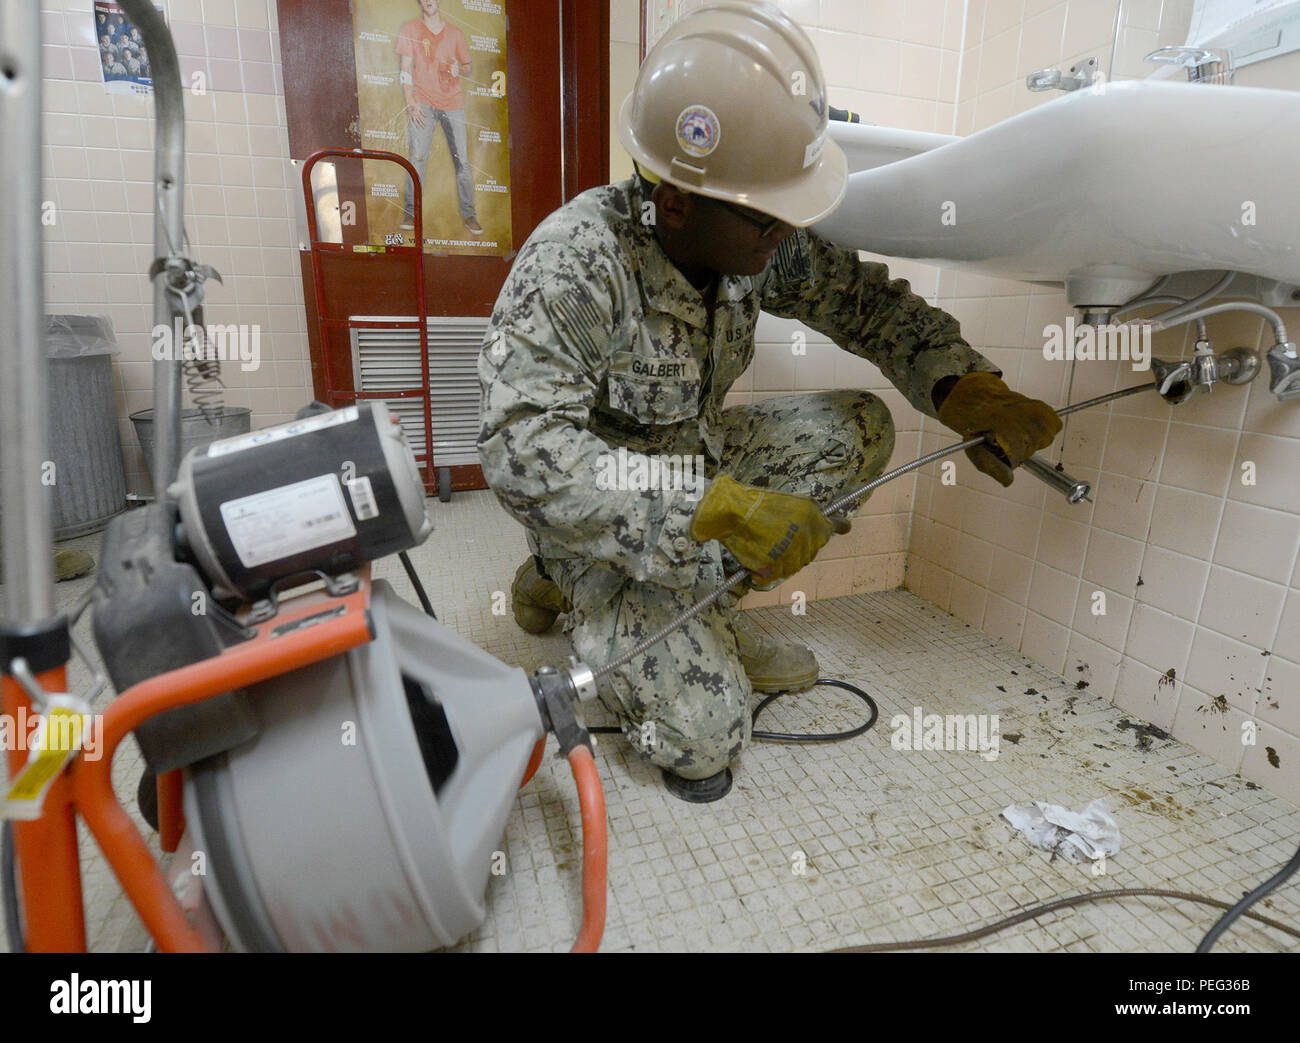 150818-N-SD120-007 OKINAWA, Japan (Aug. 18, 2015) Utilitiesman 3rd Class Kevin Galbert, from Wichita, Kan., uses an electric auger, commonly referred to as a plumbing snake, to clear a clogged drain in Naval Mobile Construction Battalion (NMCB) 5’s headquarters building on Camp Shields, Okinawa. NMCB 5 is currently deployed to Japan and several countries in the Pacific area of operations conducting construction operations and humanitarian assistance projects. (U.S. Navy photo by Mass Communication Specialist 1st Class John P. Curtis/Released) Stock Photo